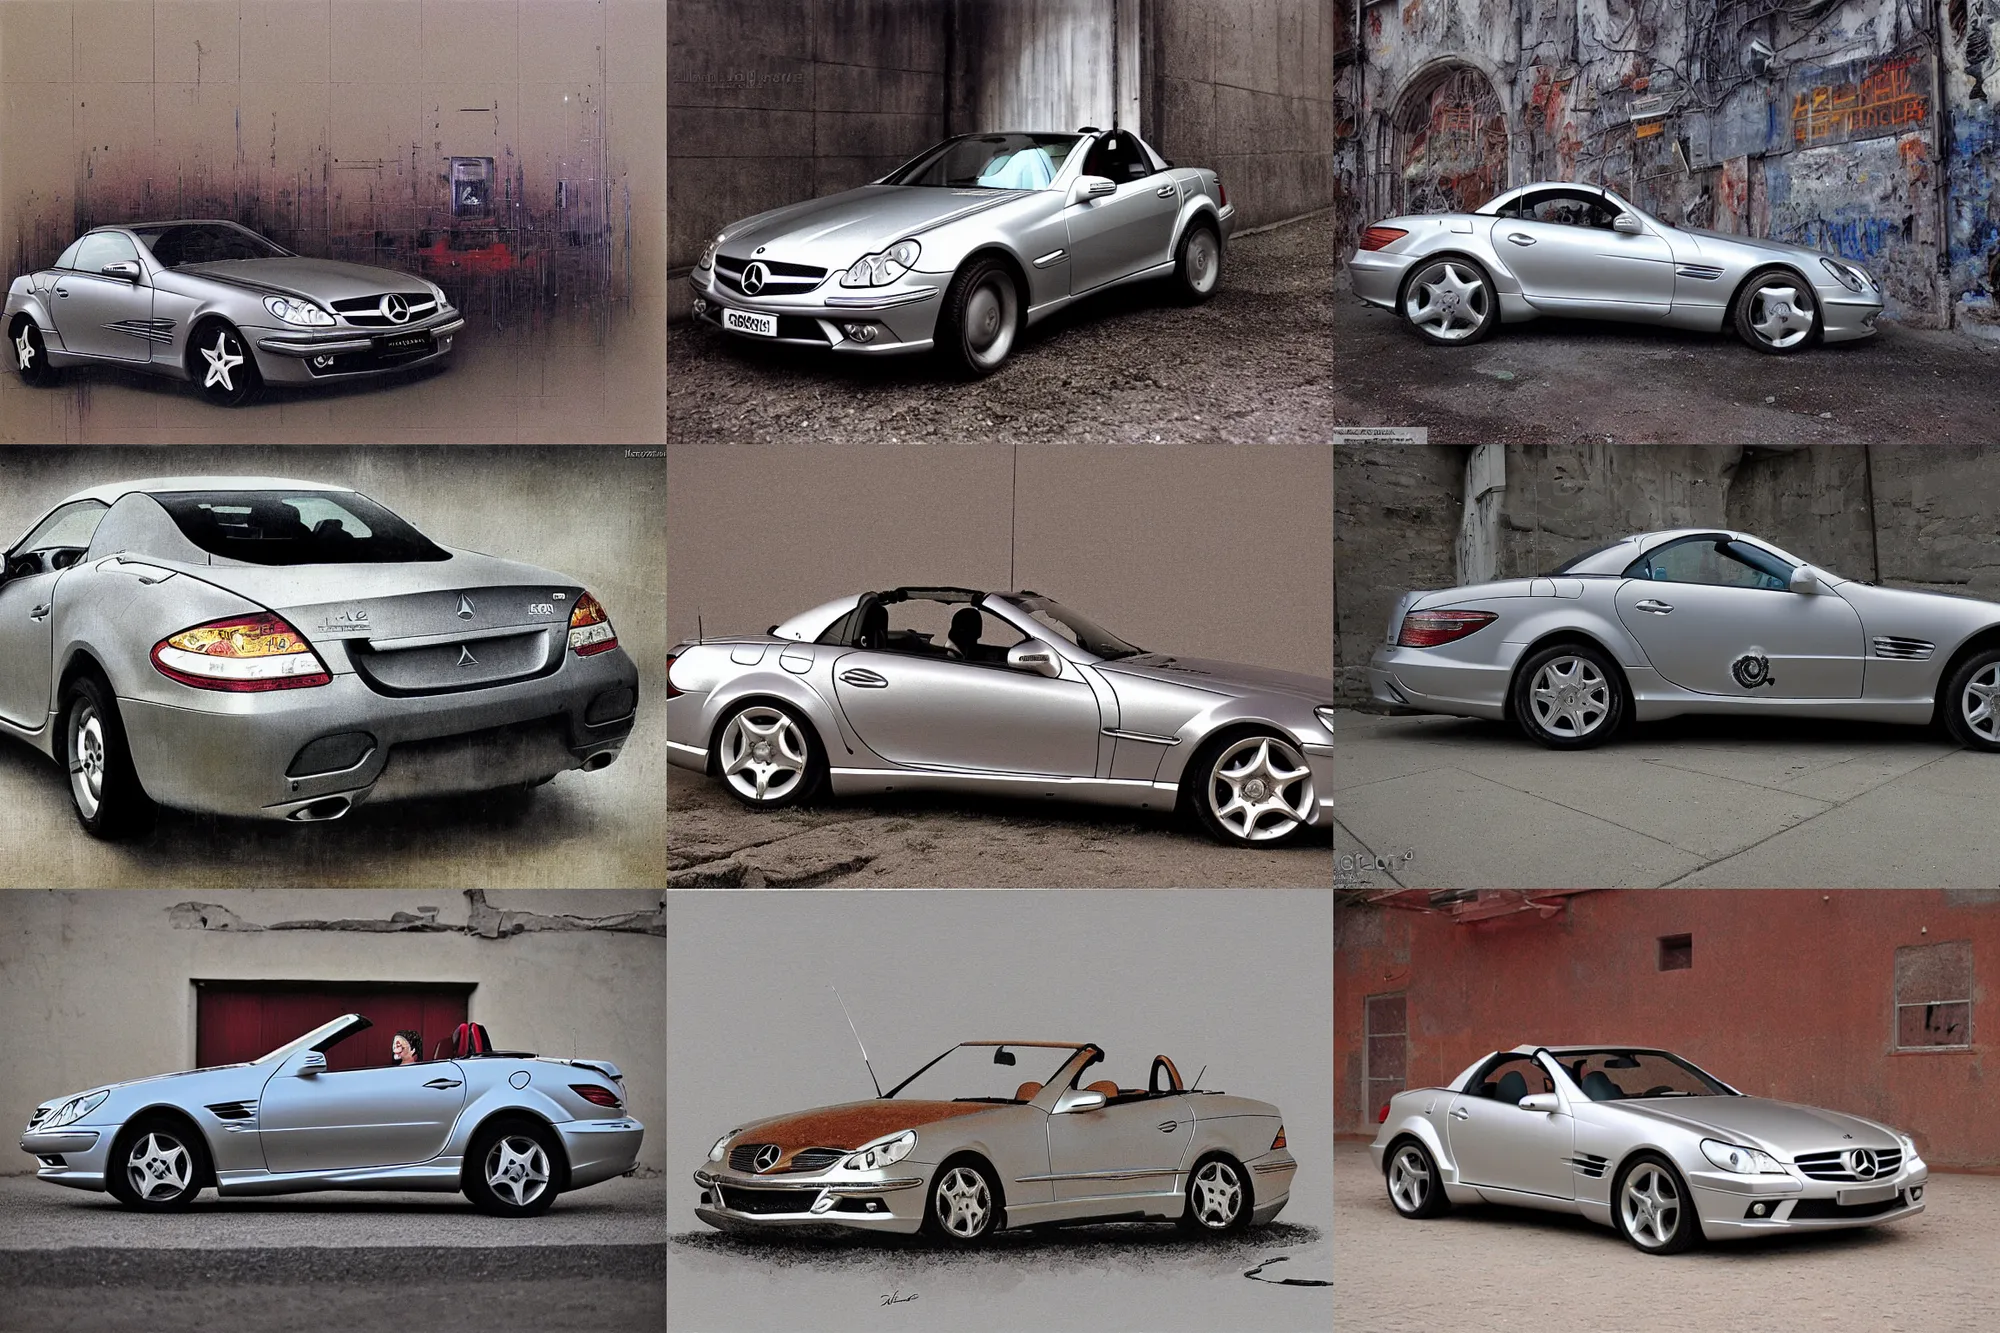 a marketplace photo of a cyberpunk Mercedes SLK 280, Stable Diffusion